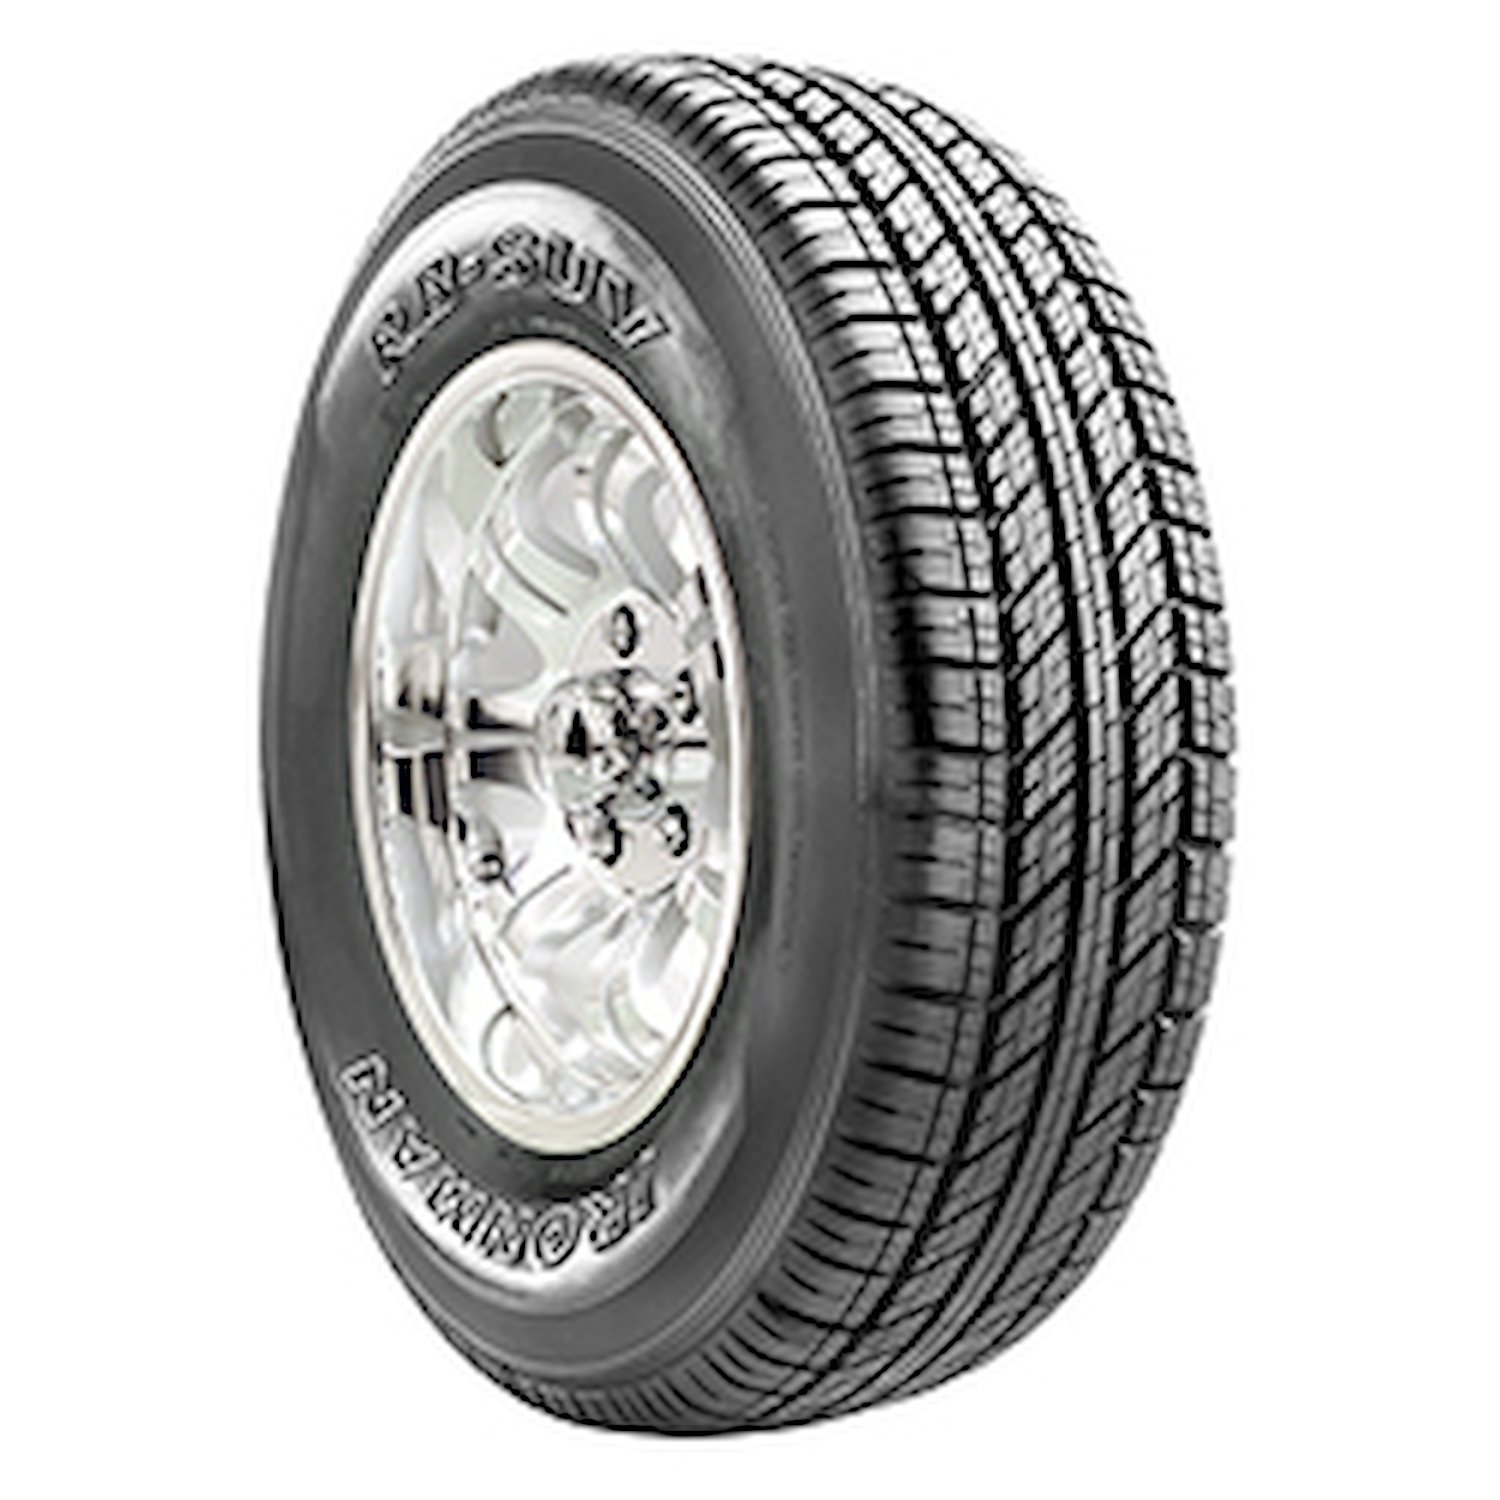 RB SUV Tire, 245/75R16 111S